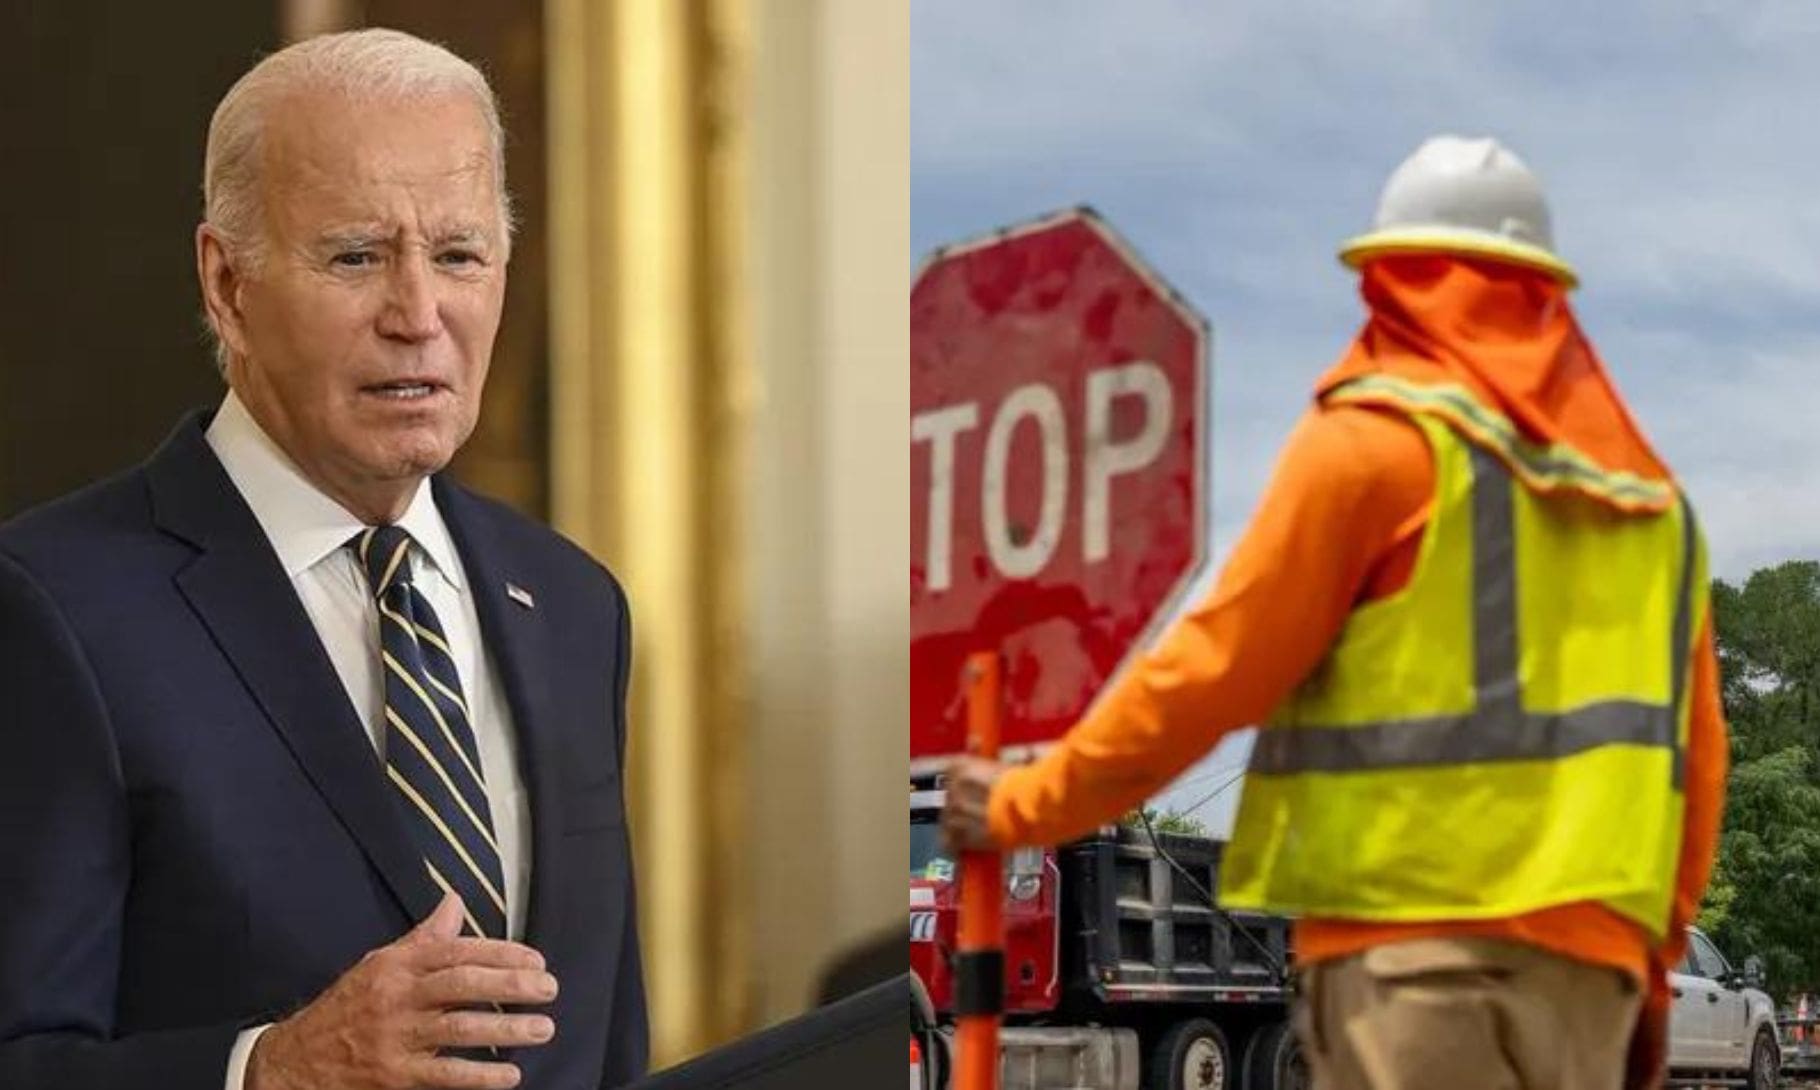 Biden Announces Heat Safety Rules To Protect 36 Million US Workers Amid Rising Temperatures